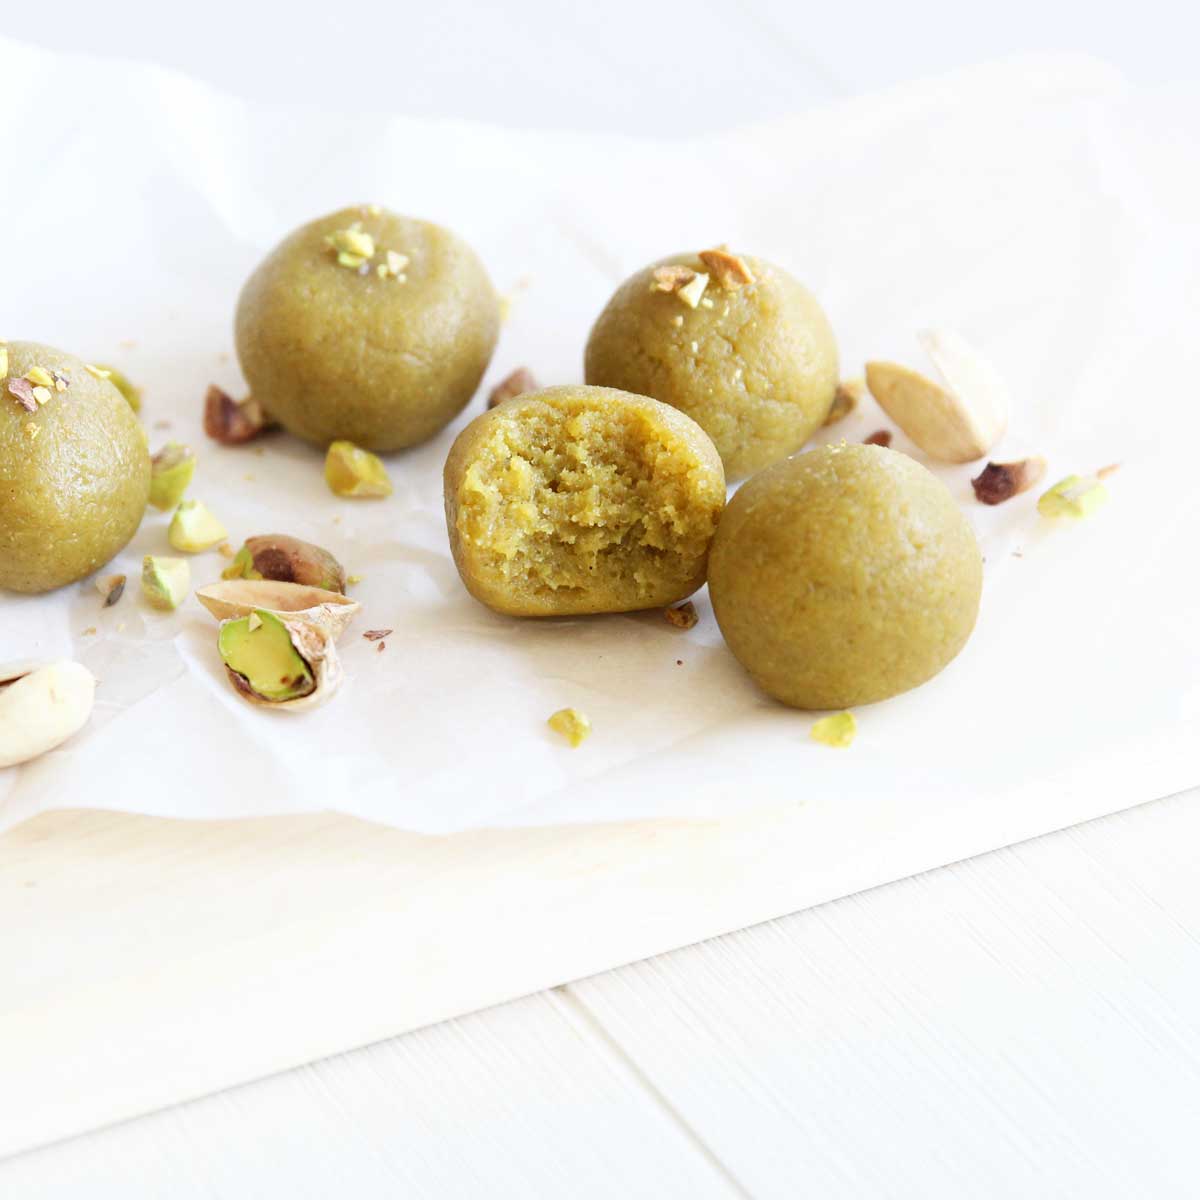 Keto Pistachio Cheesecake Protein Balls (Low Carb Energy Bites made with Collagen Peptides) - Peanut Clusters with Collagen